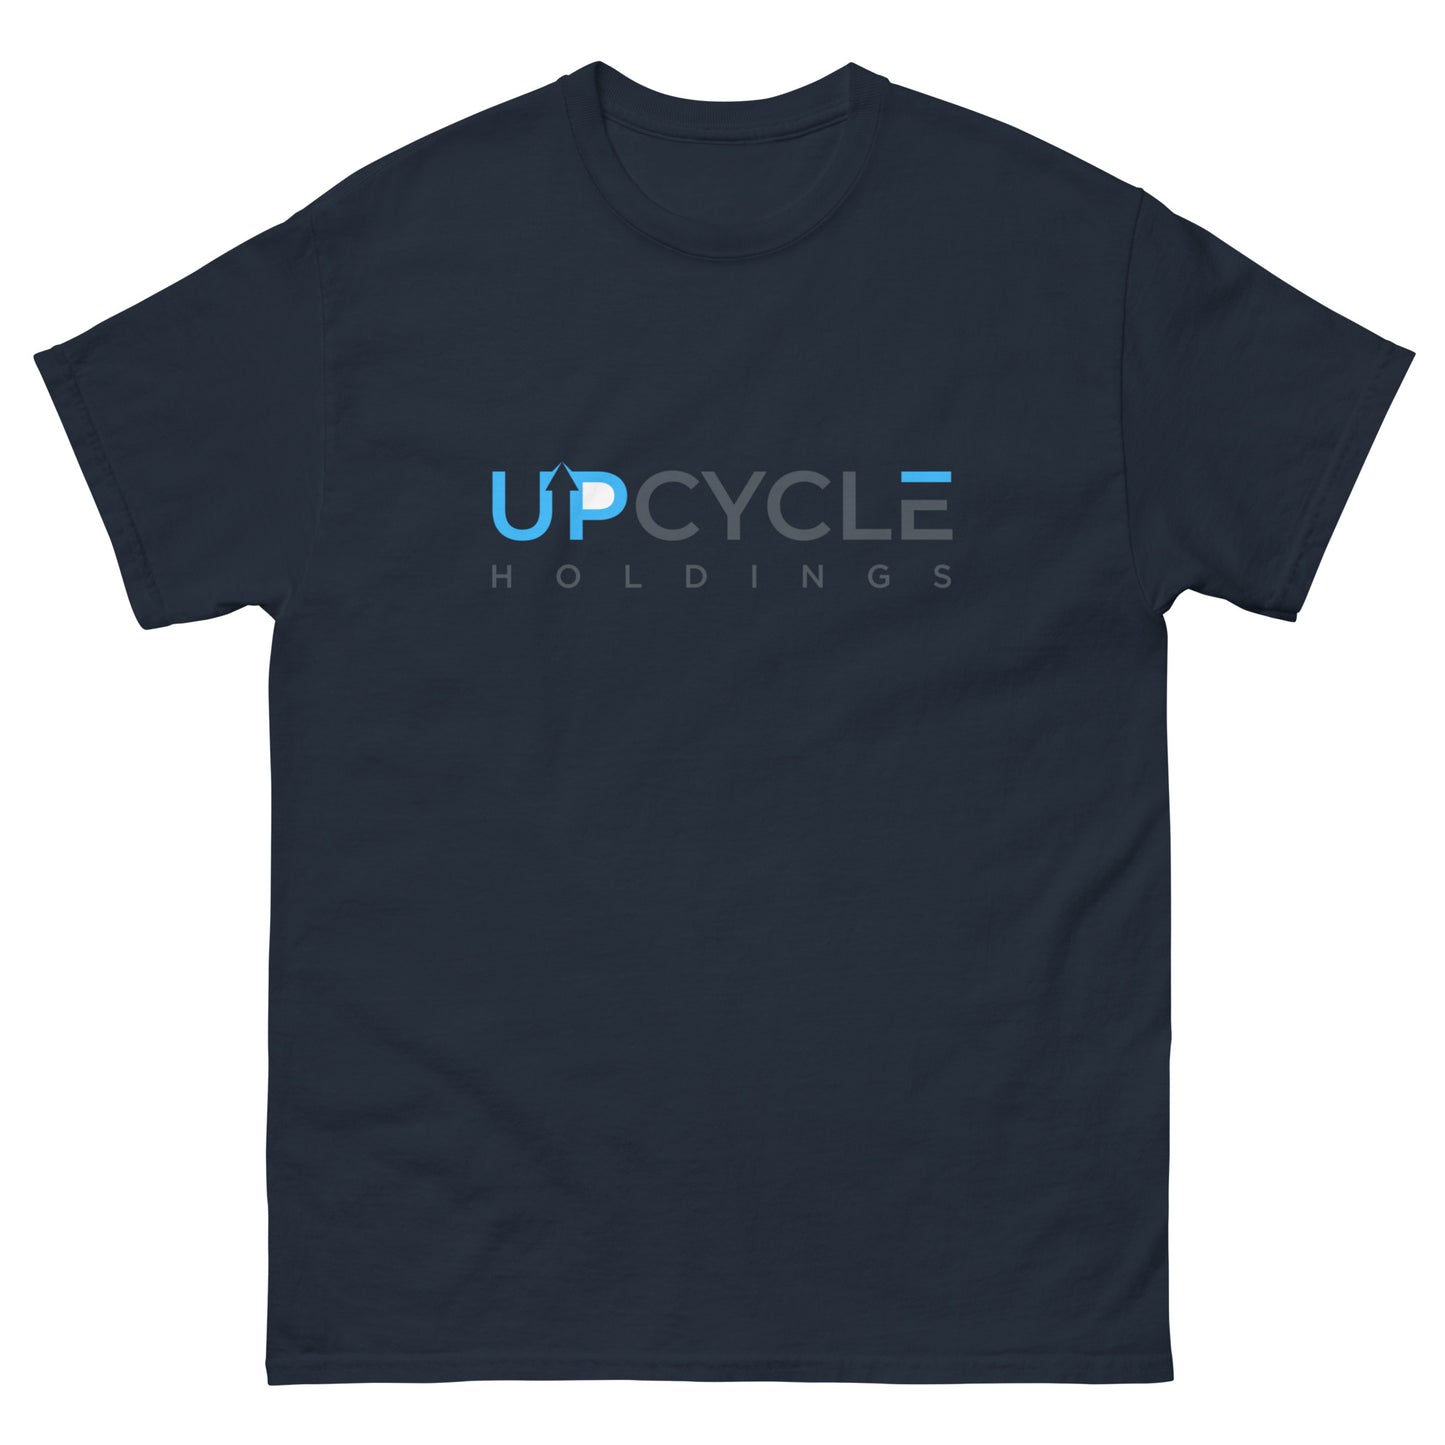 Upcycle t-shirt